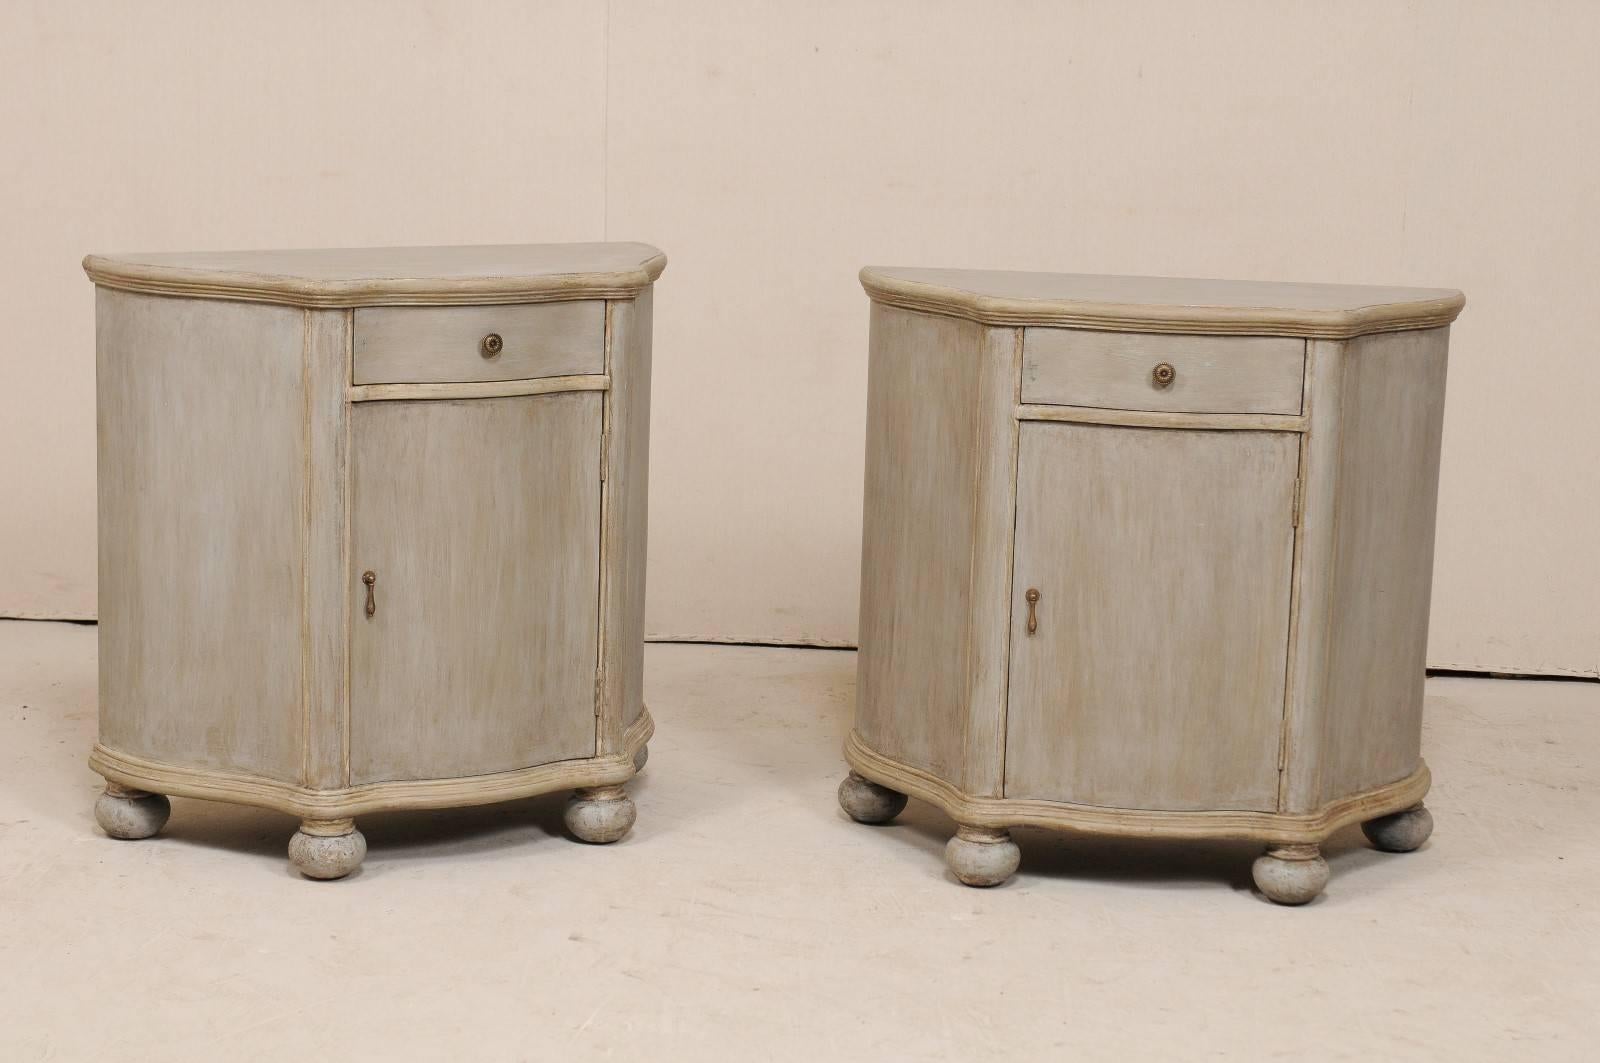 A pair of vintage American painted wood cabinets. These chests each feature demi styled bodies with curvaceous fronts and flat backsides. The cabinet body has a gentle undulating design along it's front and outward canting sides, giving these chests